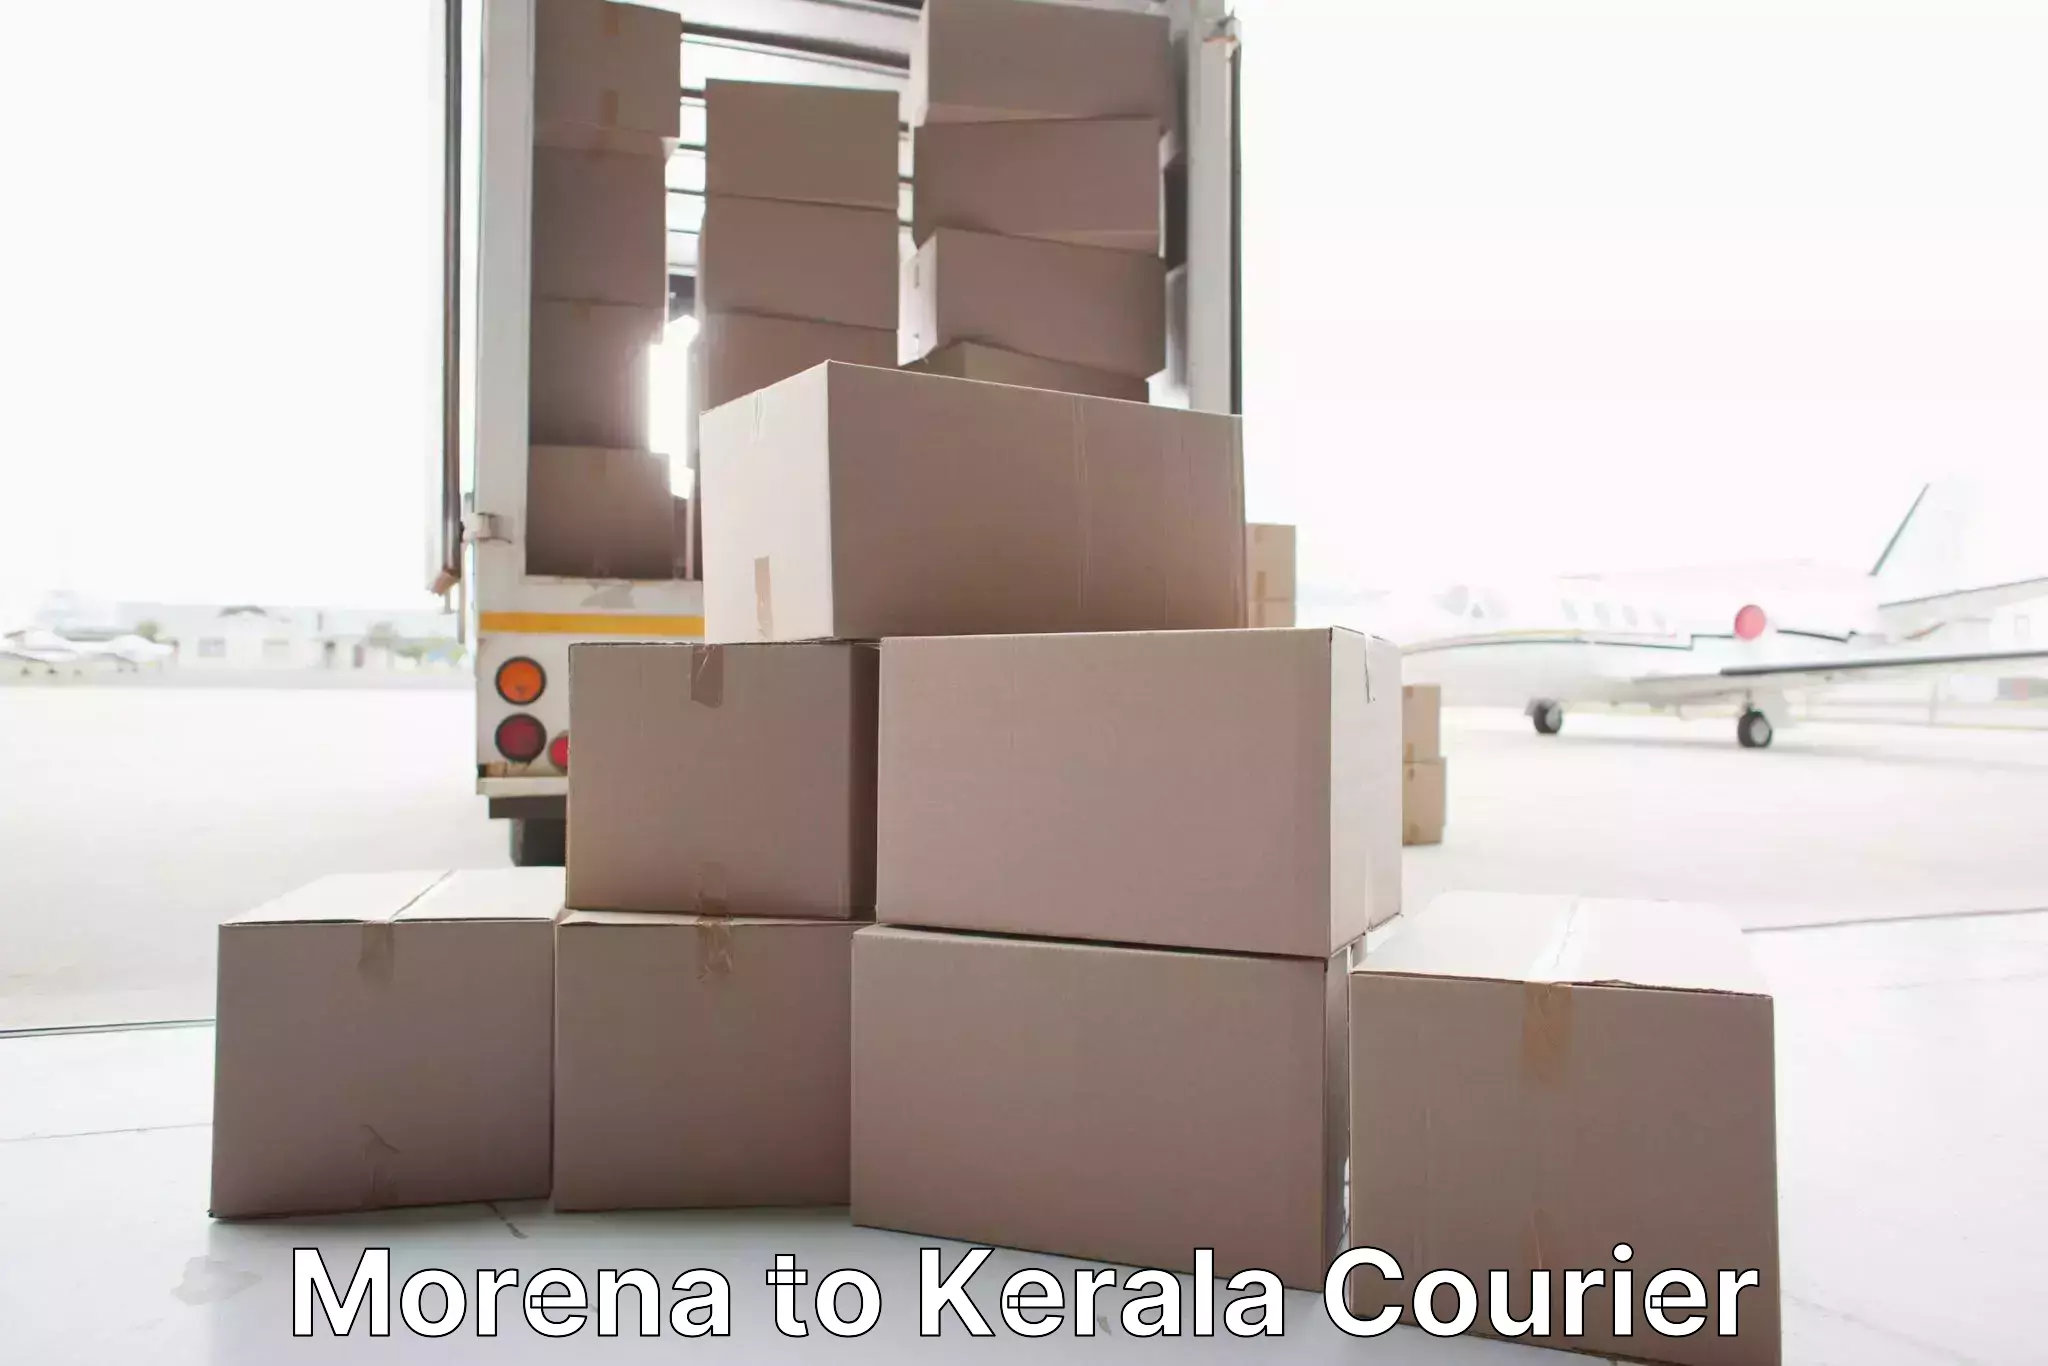 Quality relocation assistance Morena to Kerala